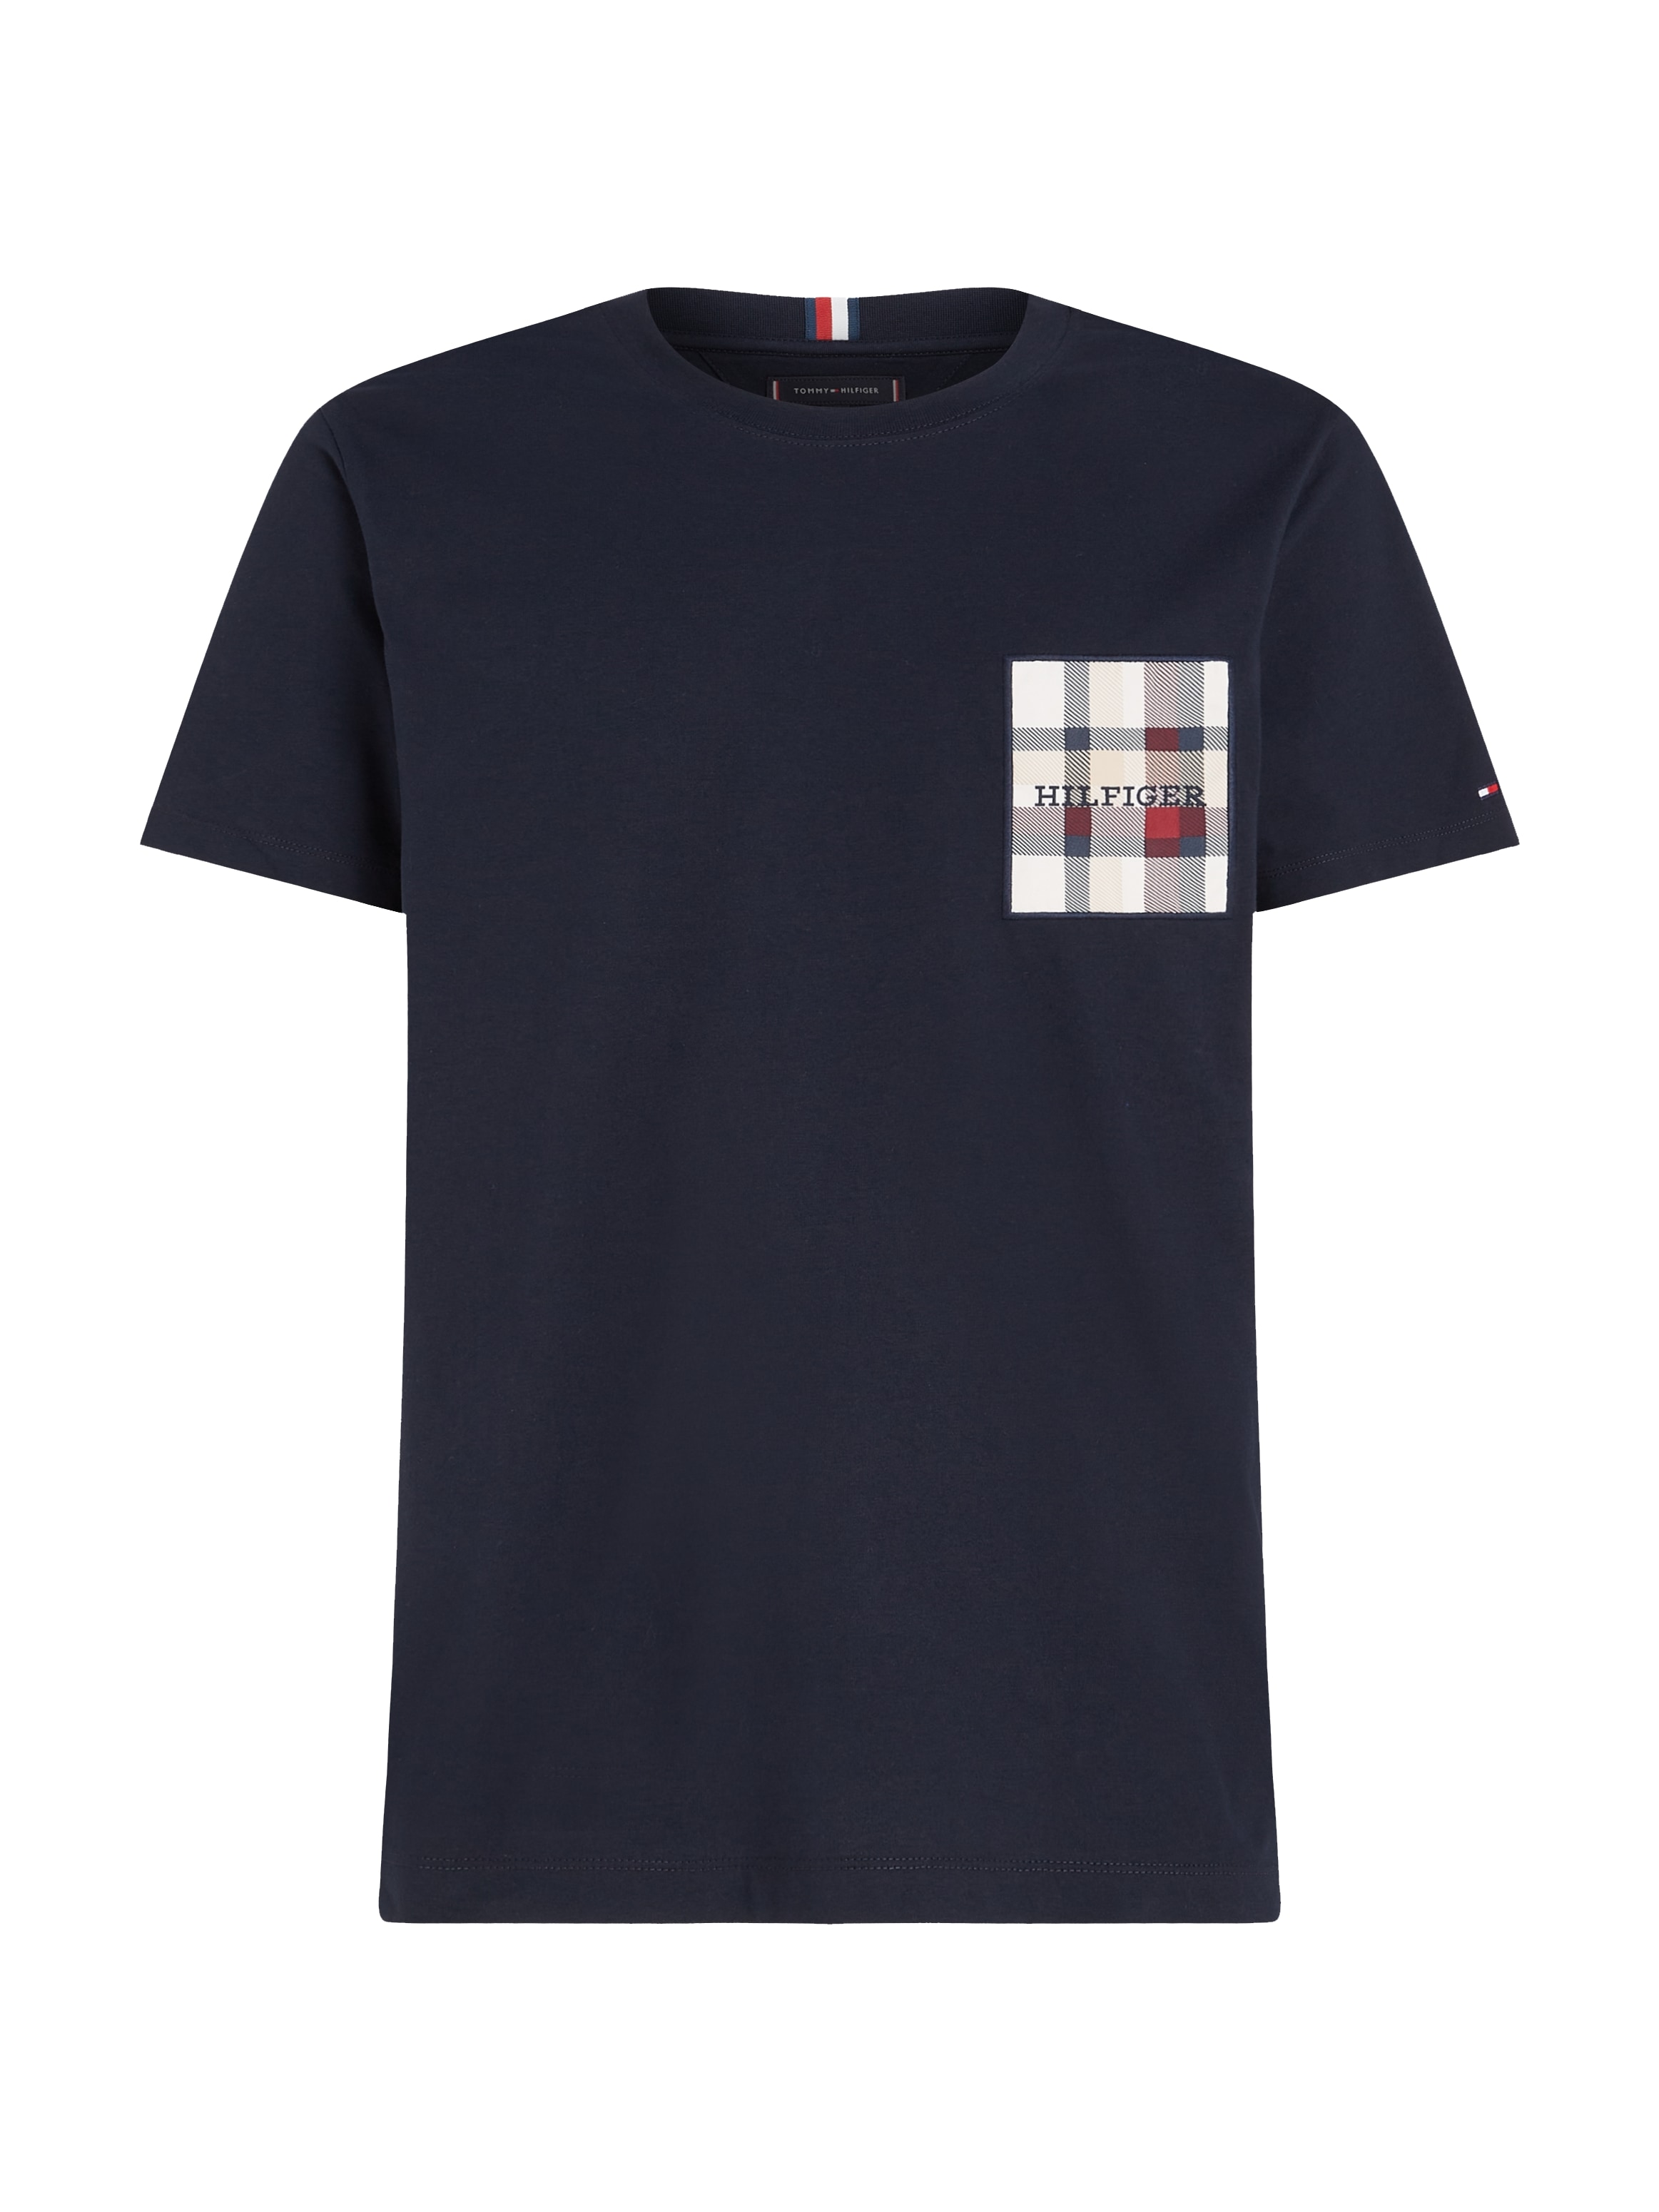 »CHECK Hilfiger T-Shirt TEE« MONOTYPE LABEL ♕ bei Tommy